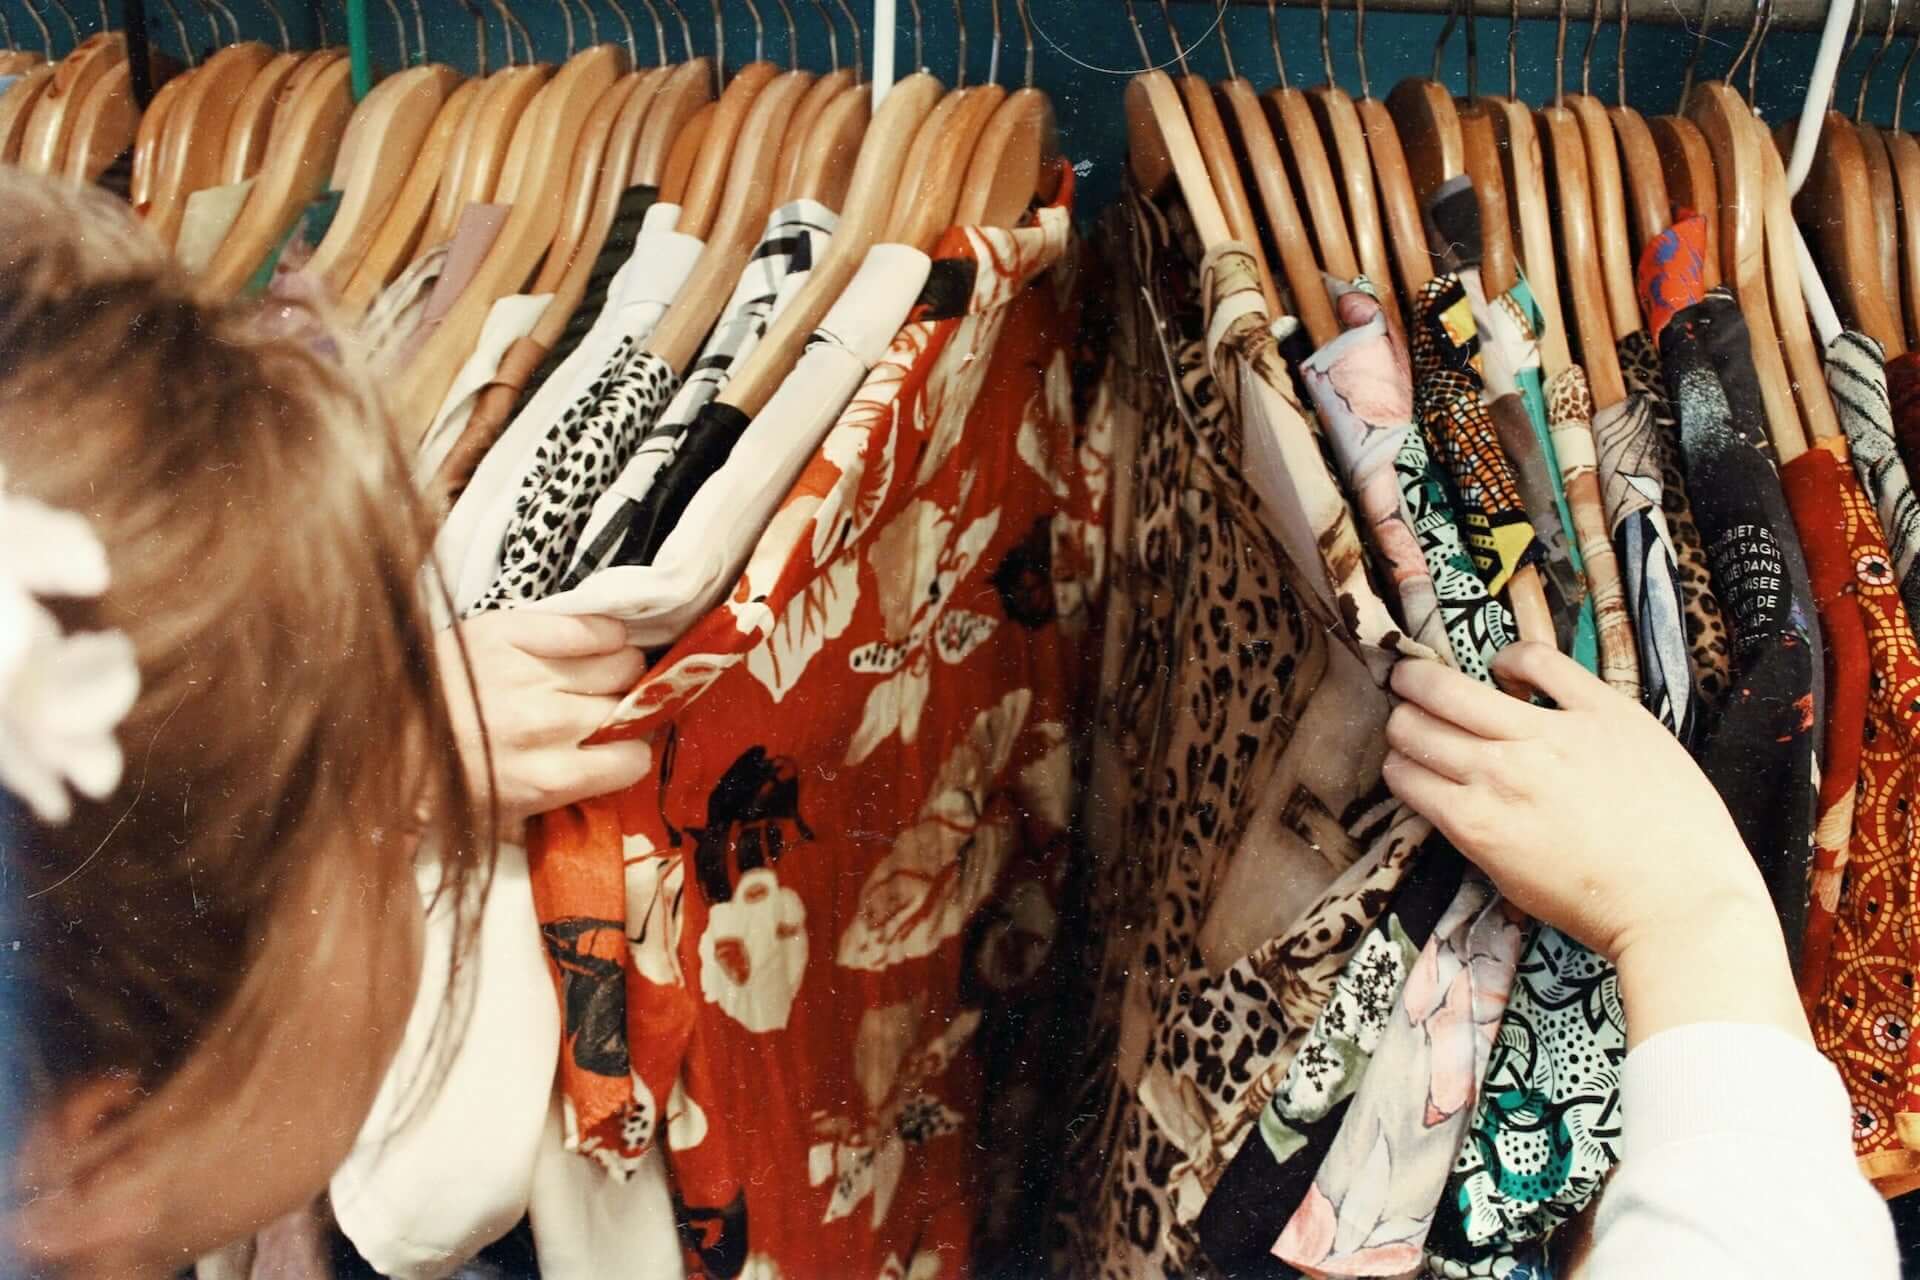 A woman looks through a rack of multicolored and patterened blouses.